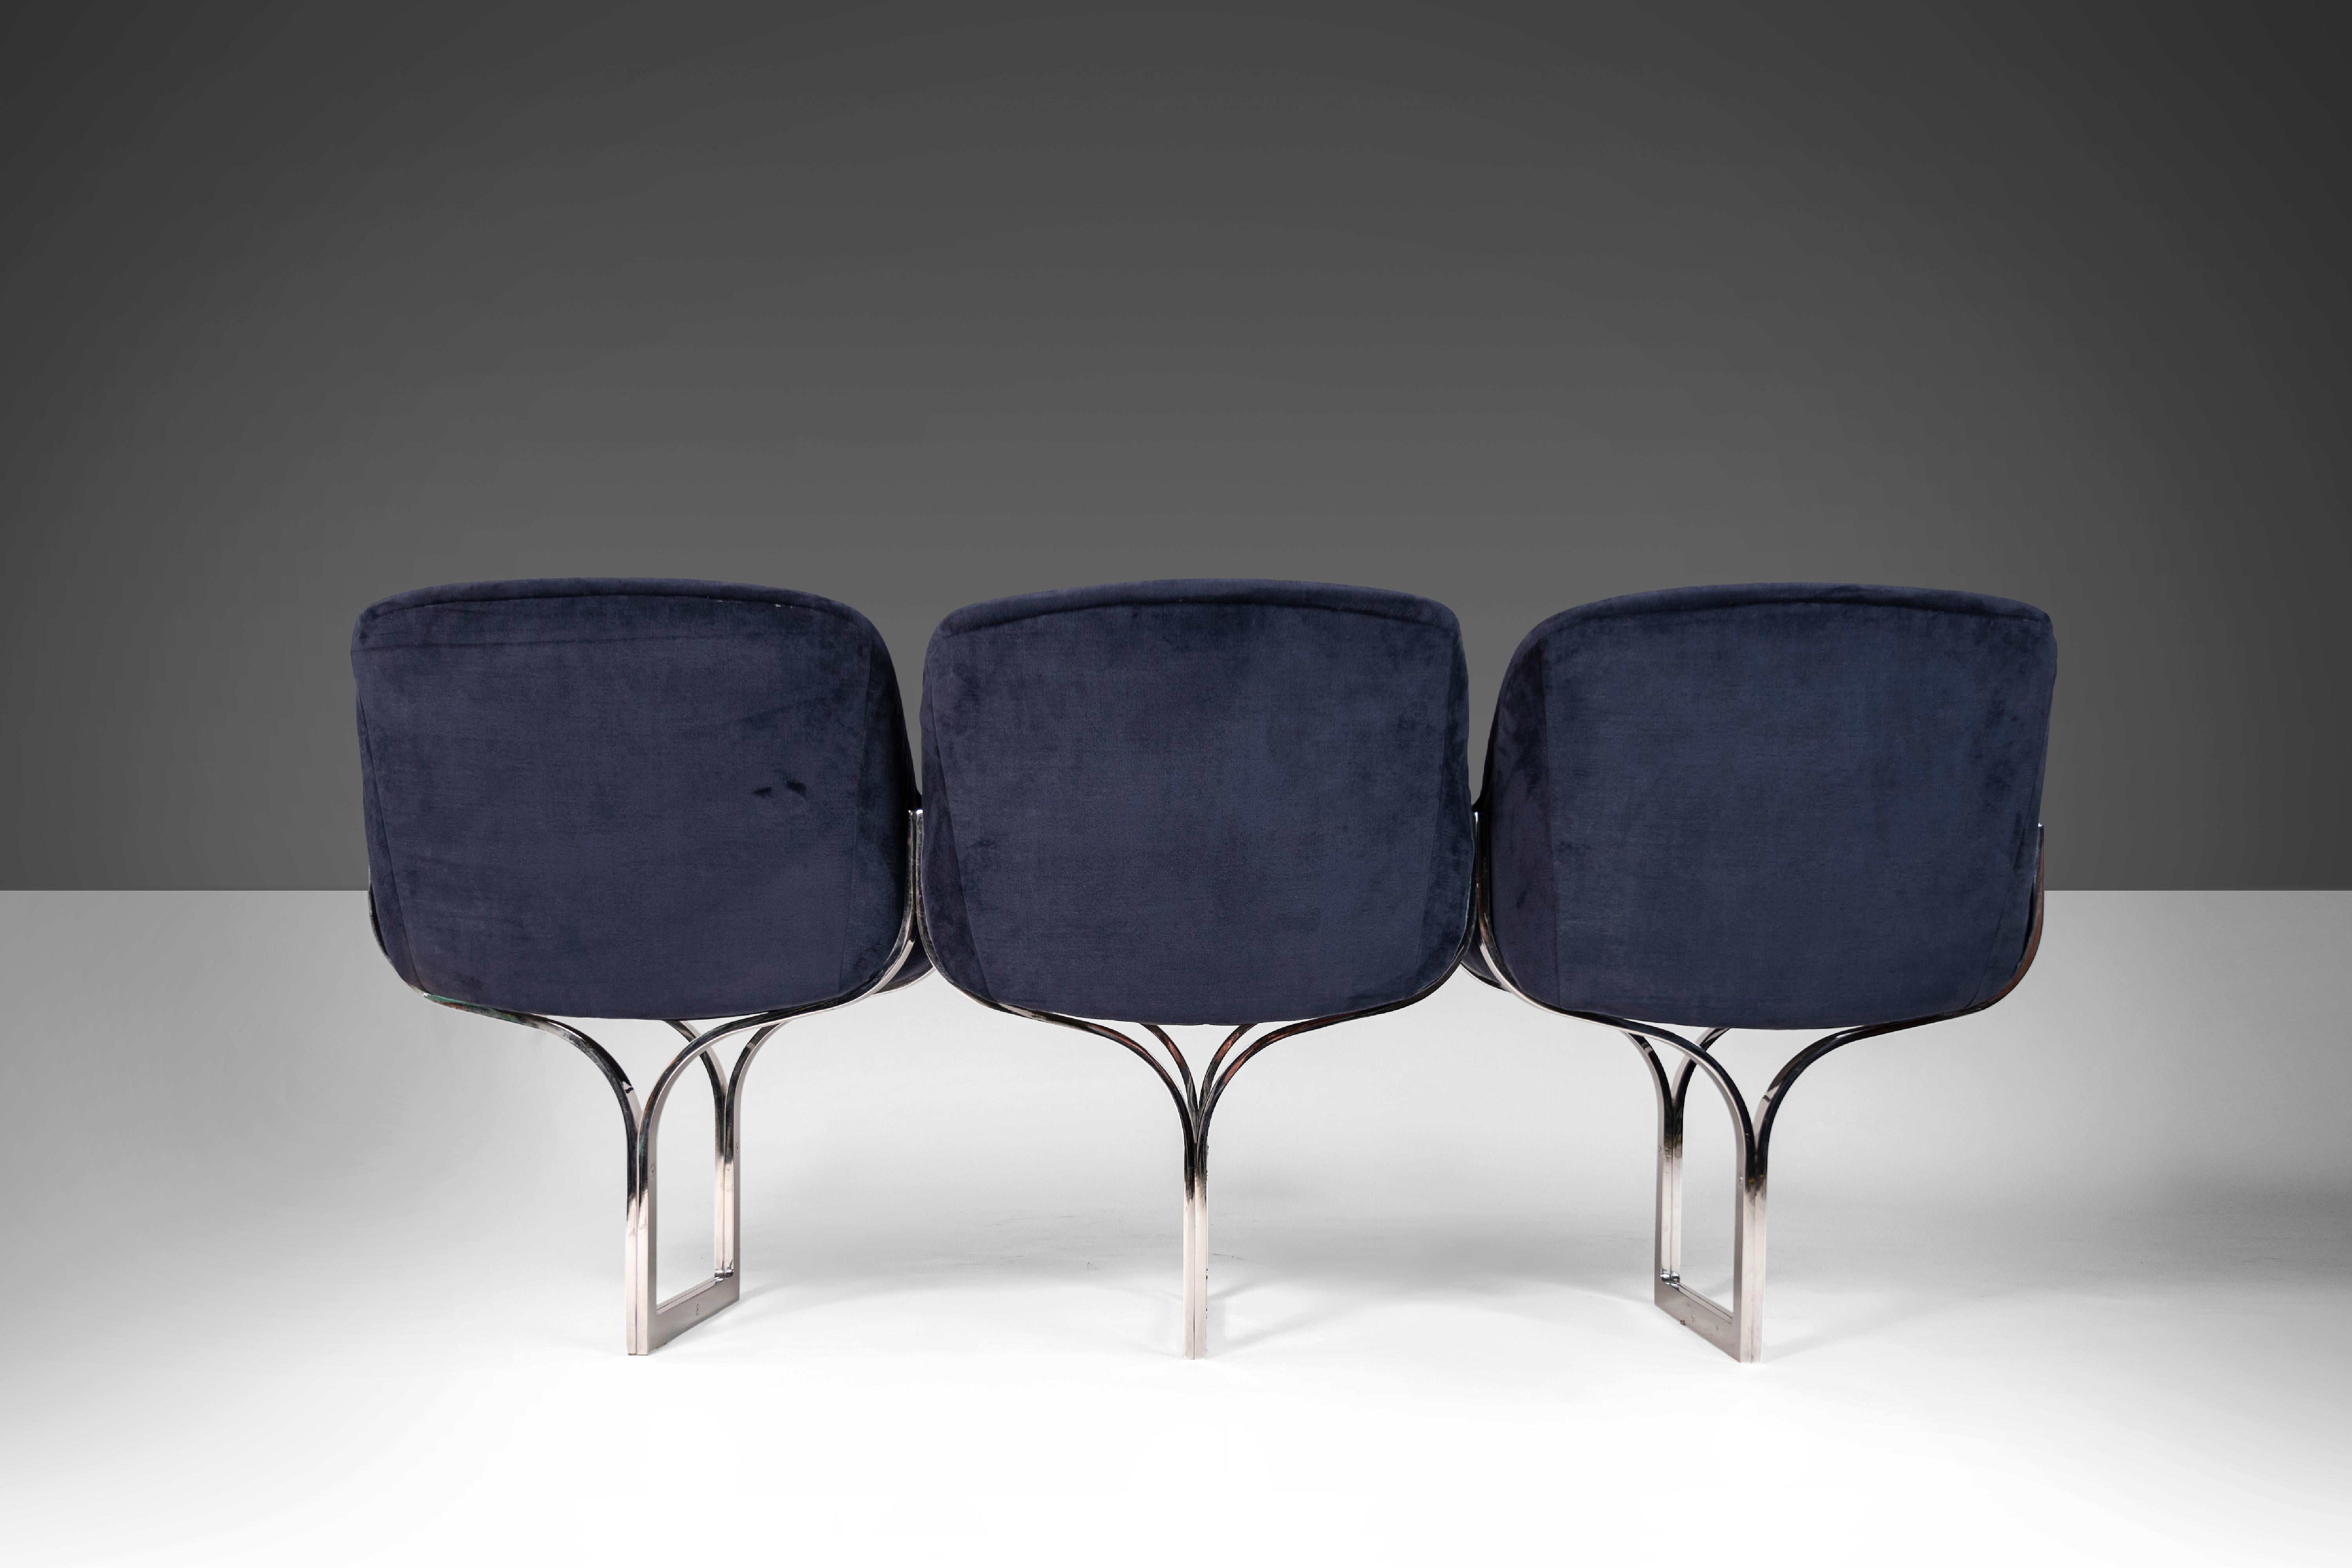 Three (3) Seat Bench / Sofa Attributed to Milo Baughman on Chrome Base, c. 1970s For Sale 4